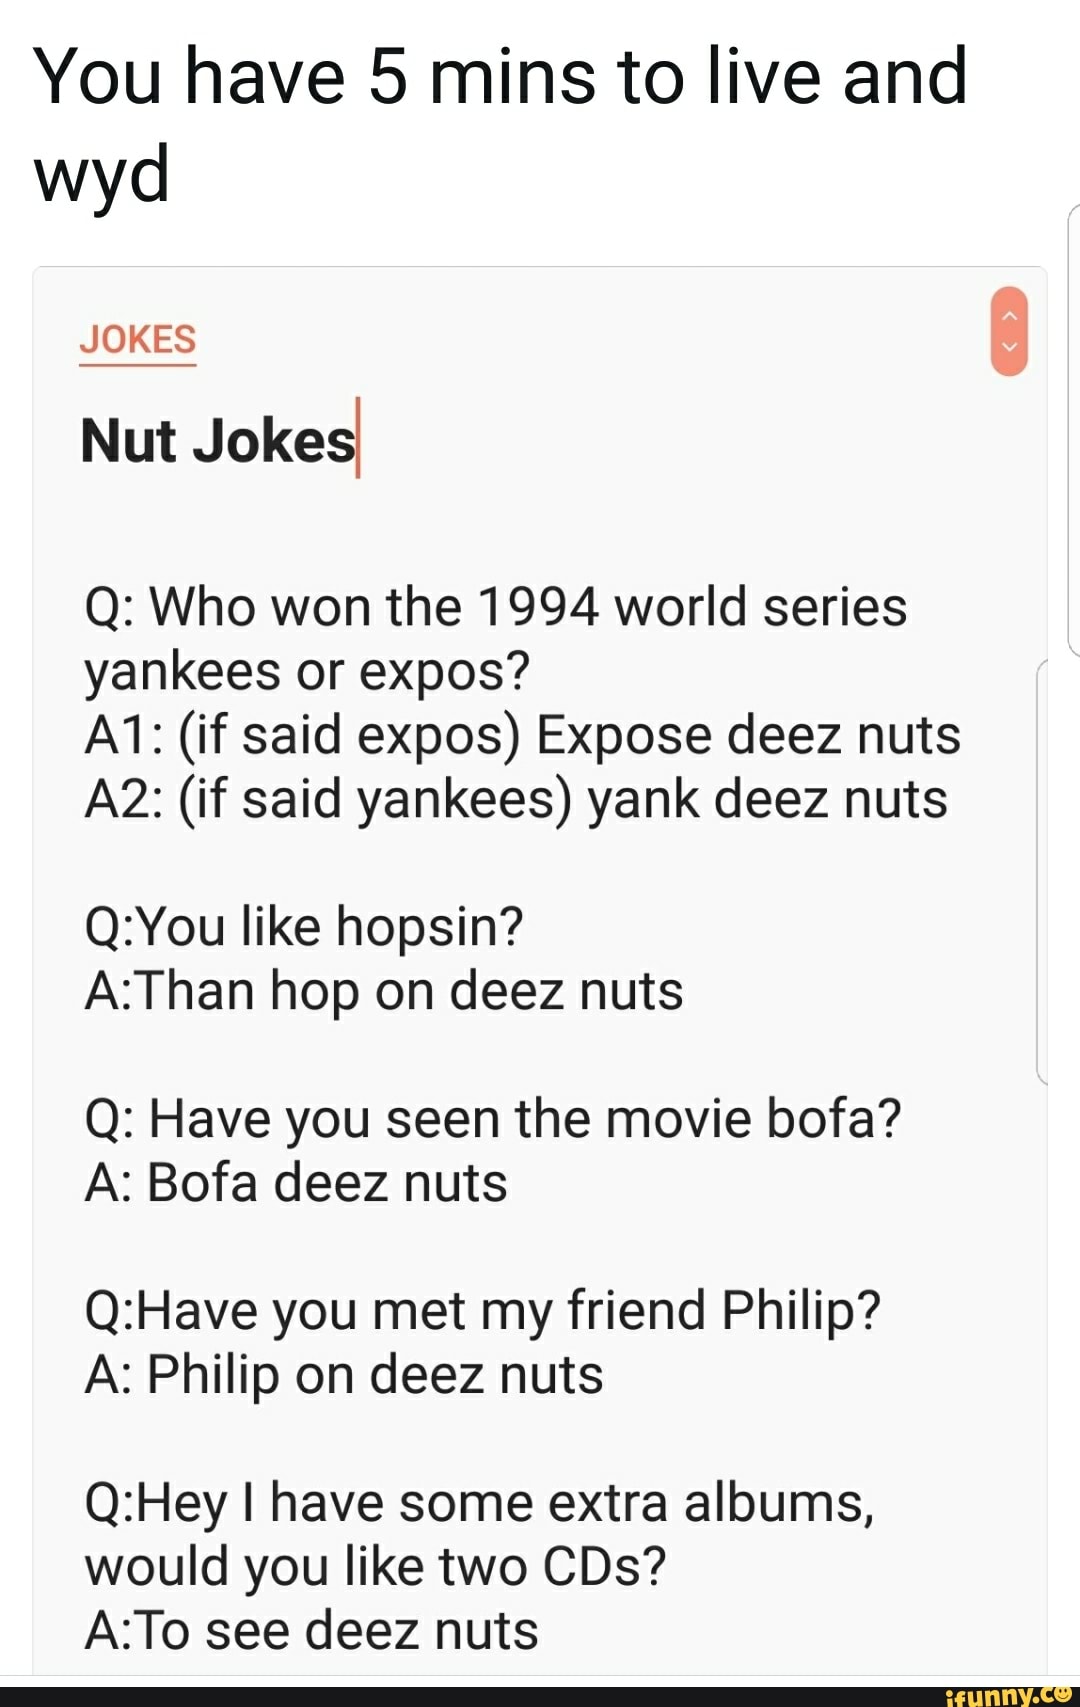 You Have 5 Mins To Live And Wyd Jokes Nut Jokesl Q Who Won The 1994 World Series Yankees Or Expos A1 If Said Expos Expose Deez Nuts If Said Yankees